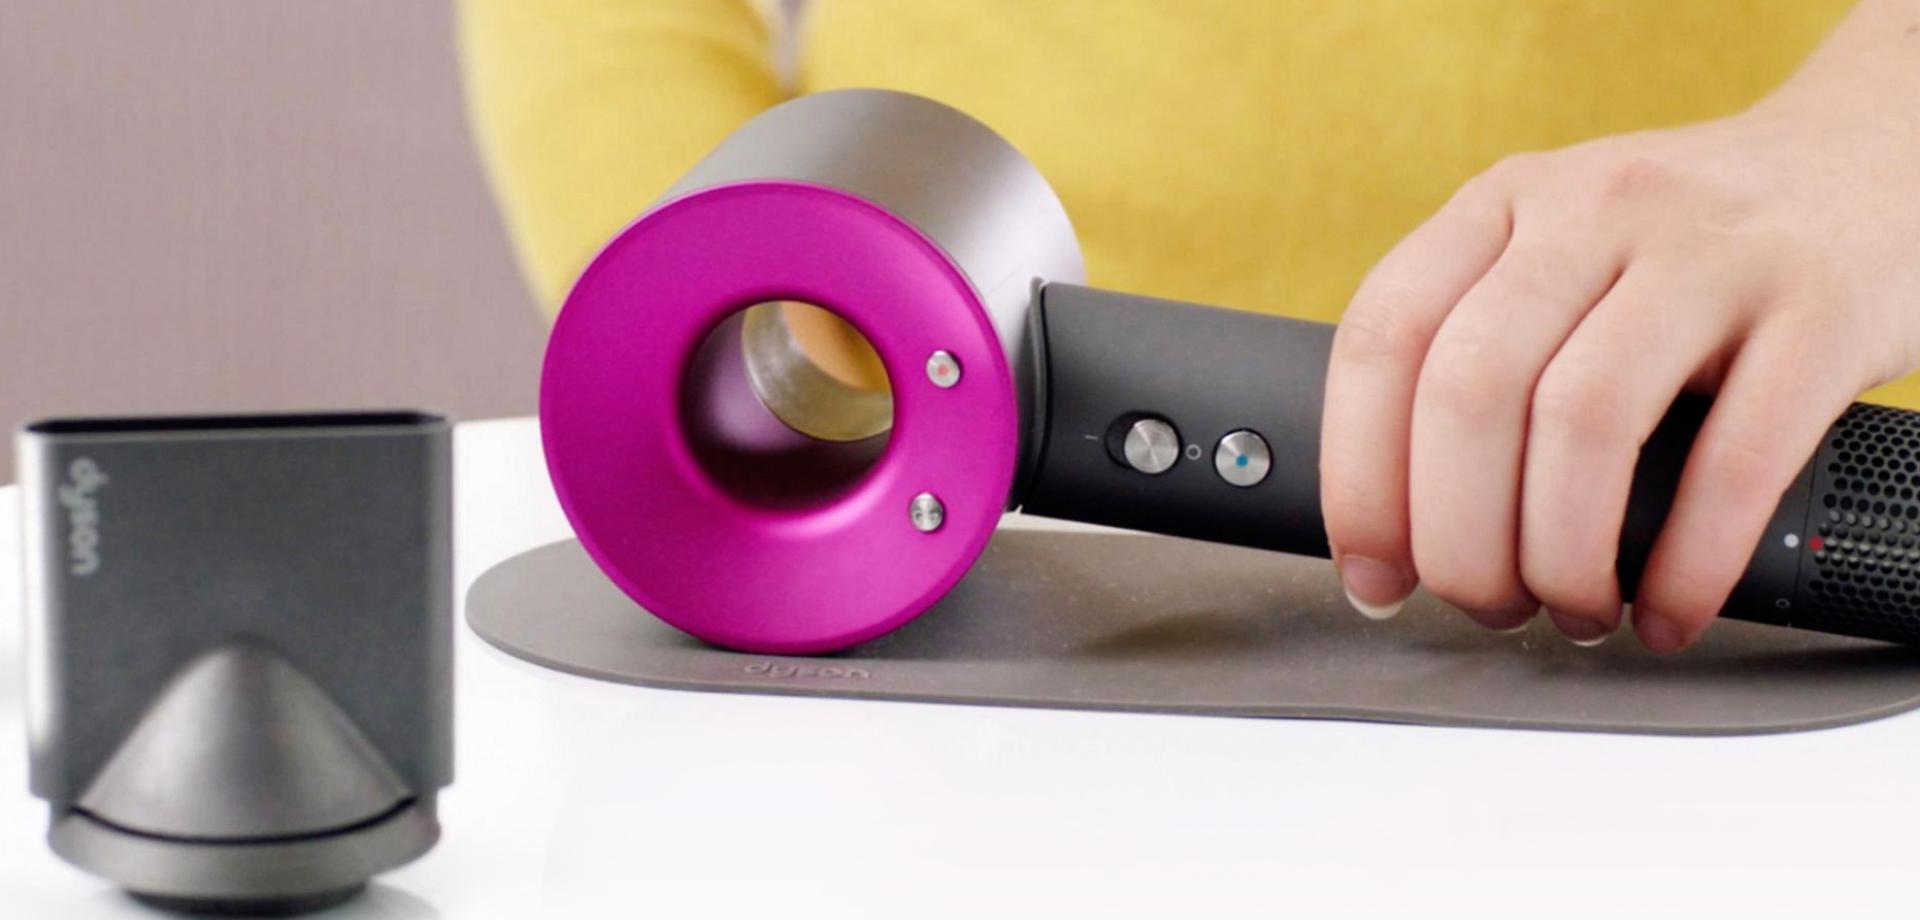 Video showing how to use your Dyson Supersonic™ hair dryer